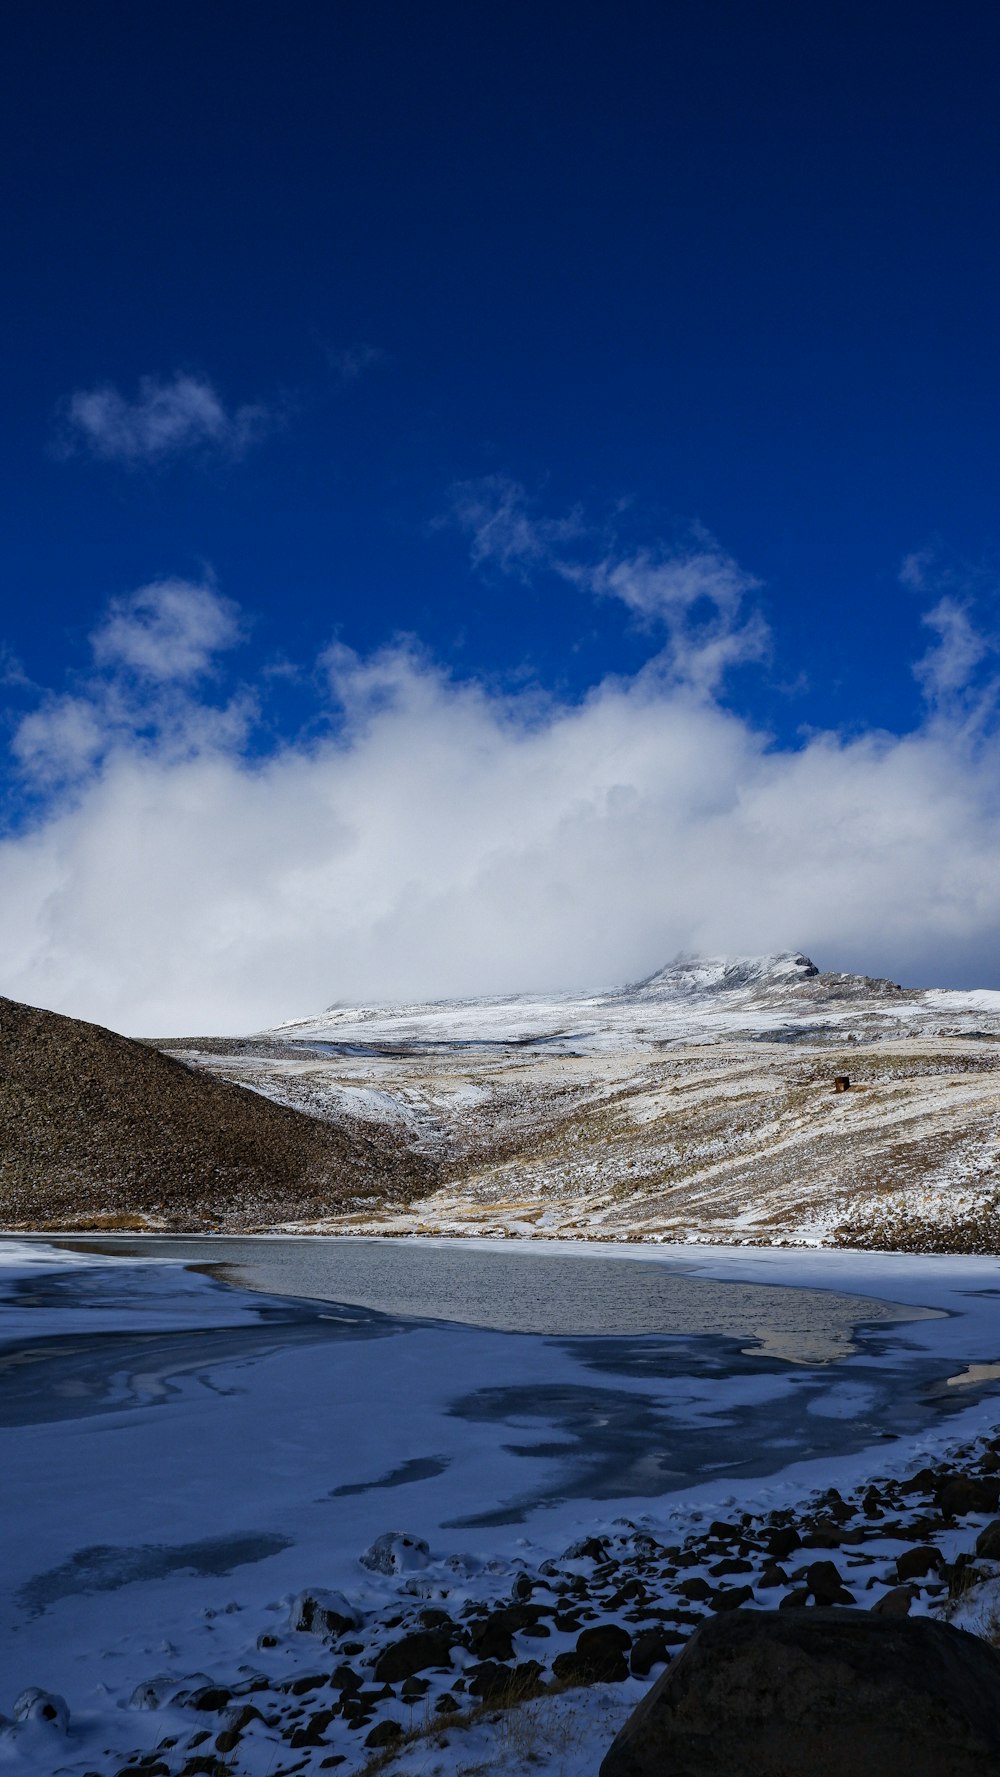 a snowy landscape with a body of water and a blue sky